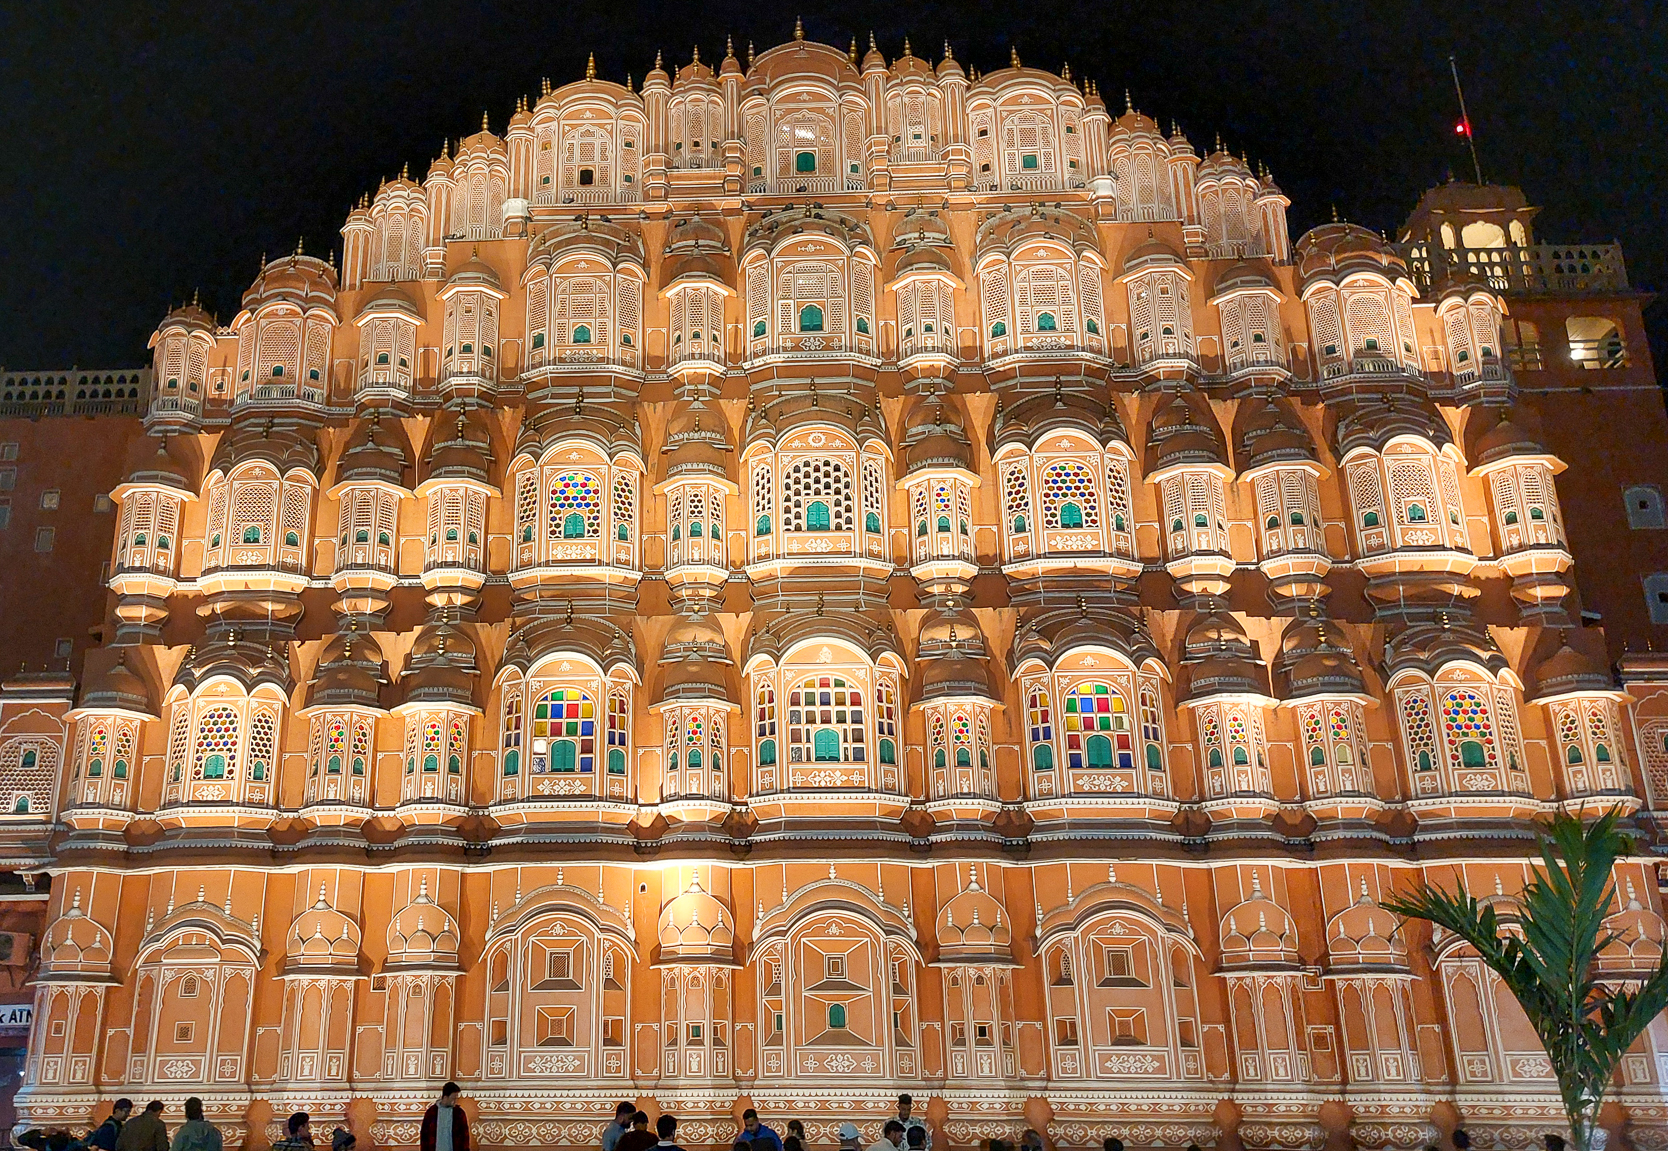 <span  class="uc_style_uc_tiles_grid_image_elementor_uc_items_attribute_title" style="color:#ffffff;">'Hawa Mahal' at night</span>